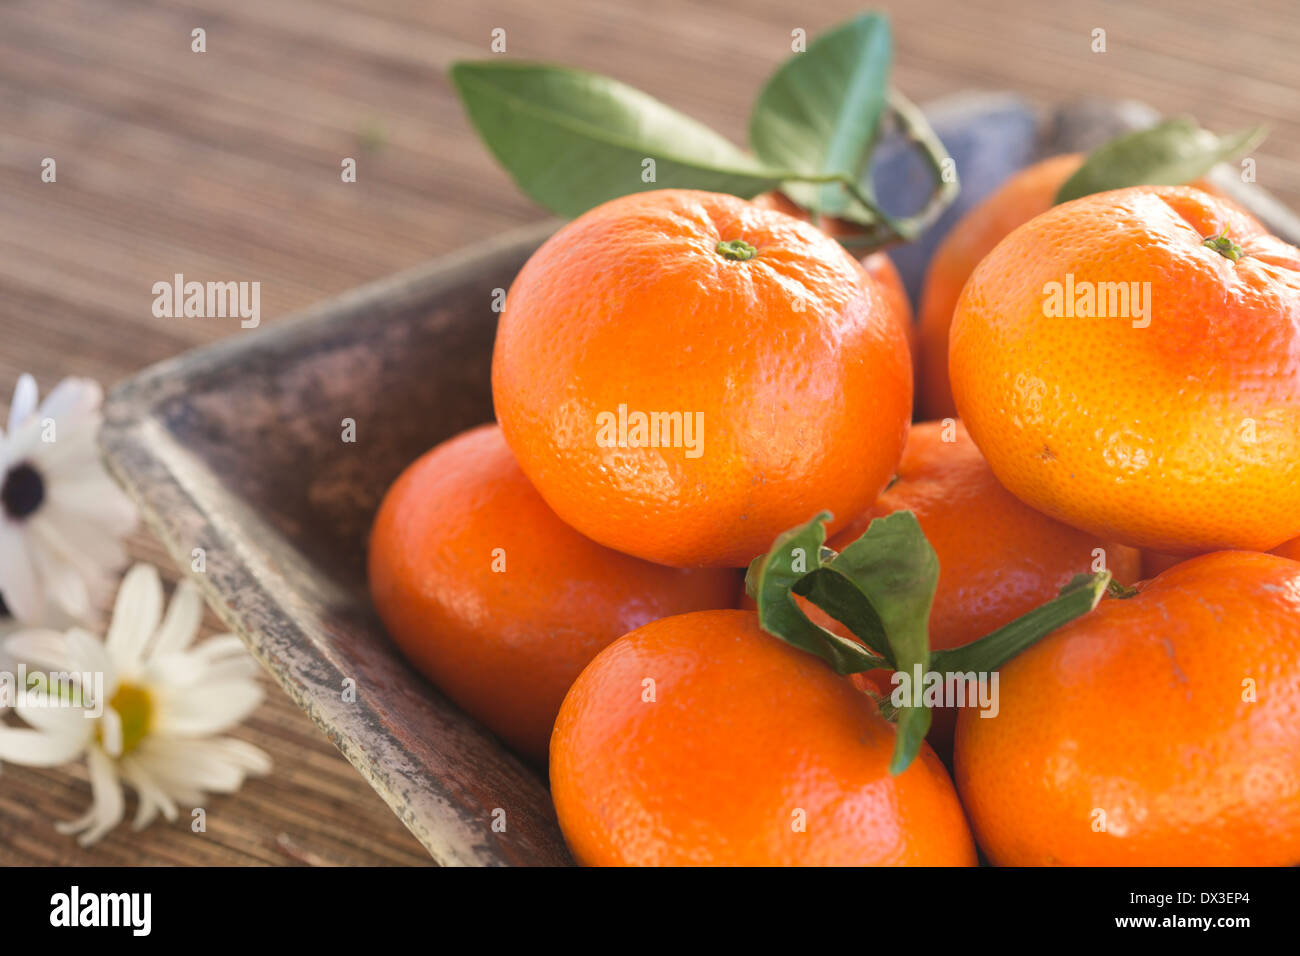 mandarins in a rustic blue bowl on a woven mat, Stock Photo